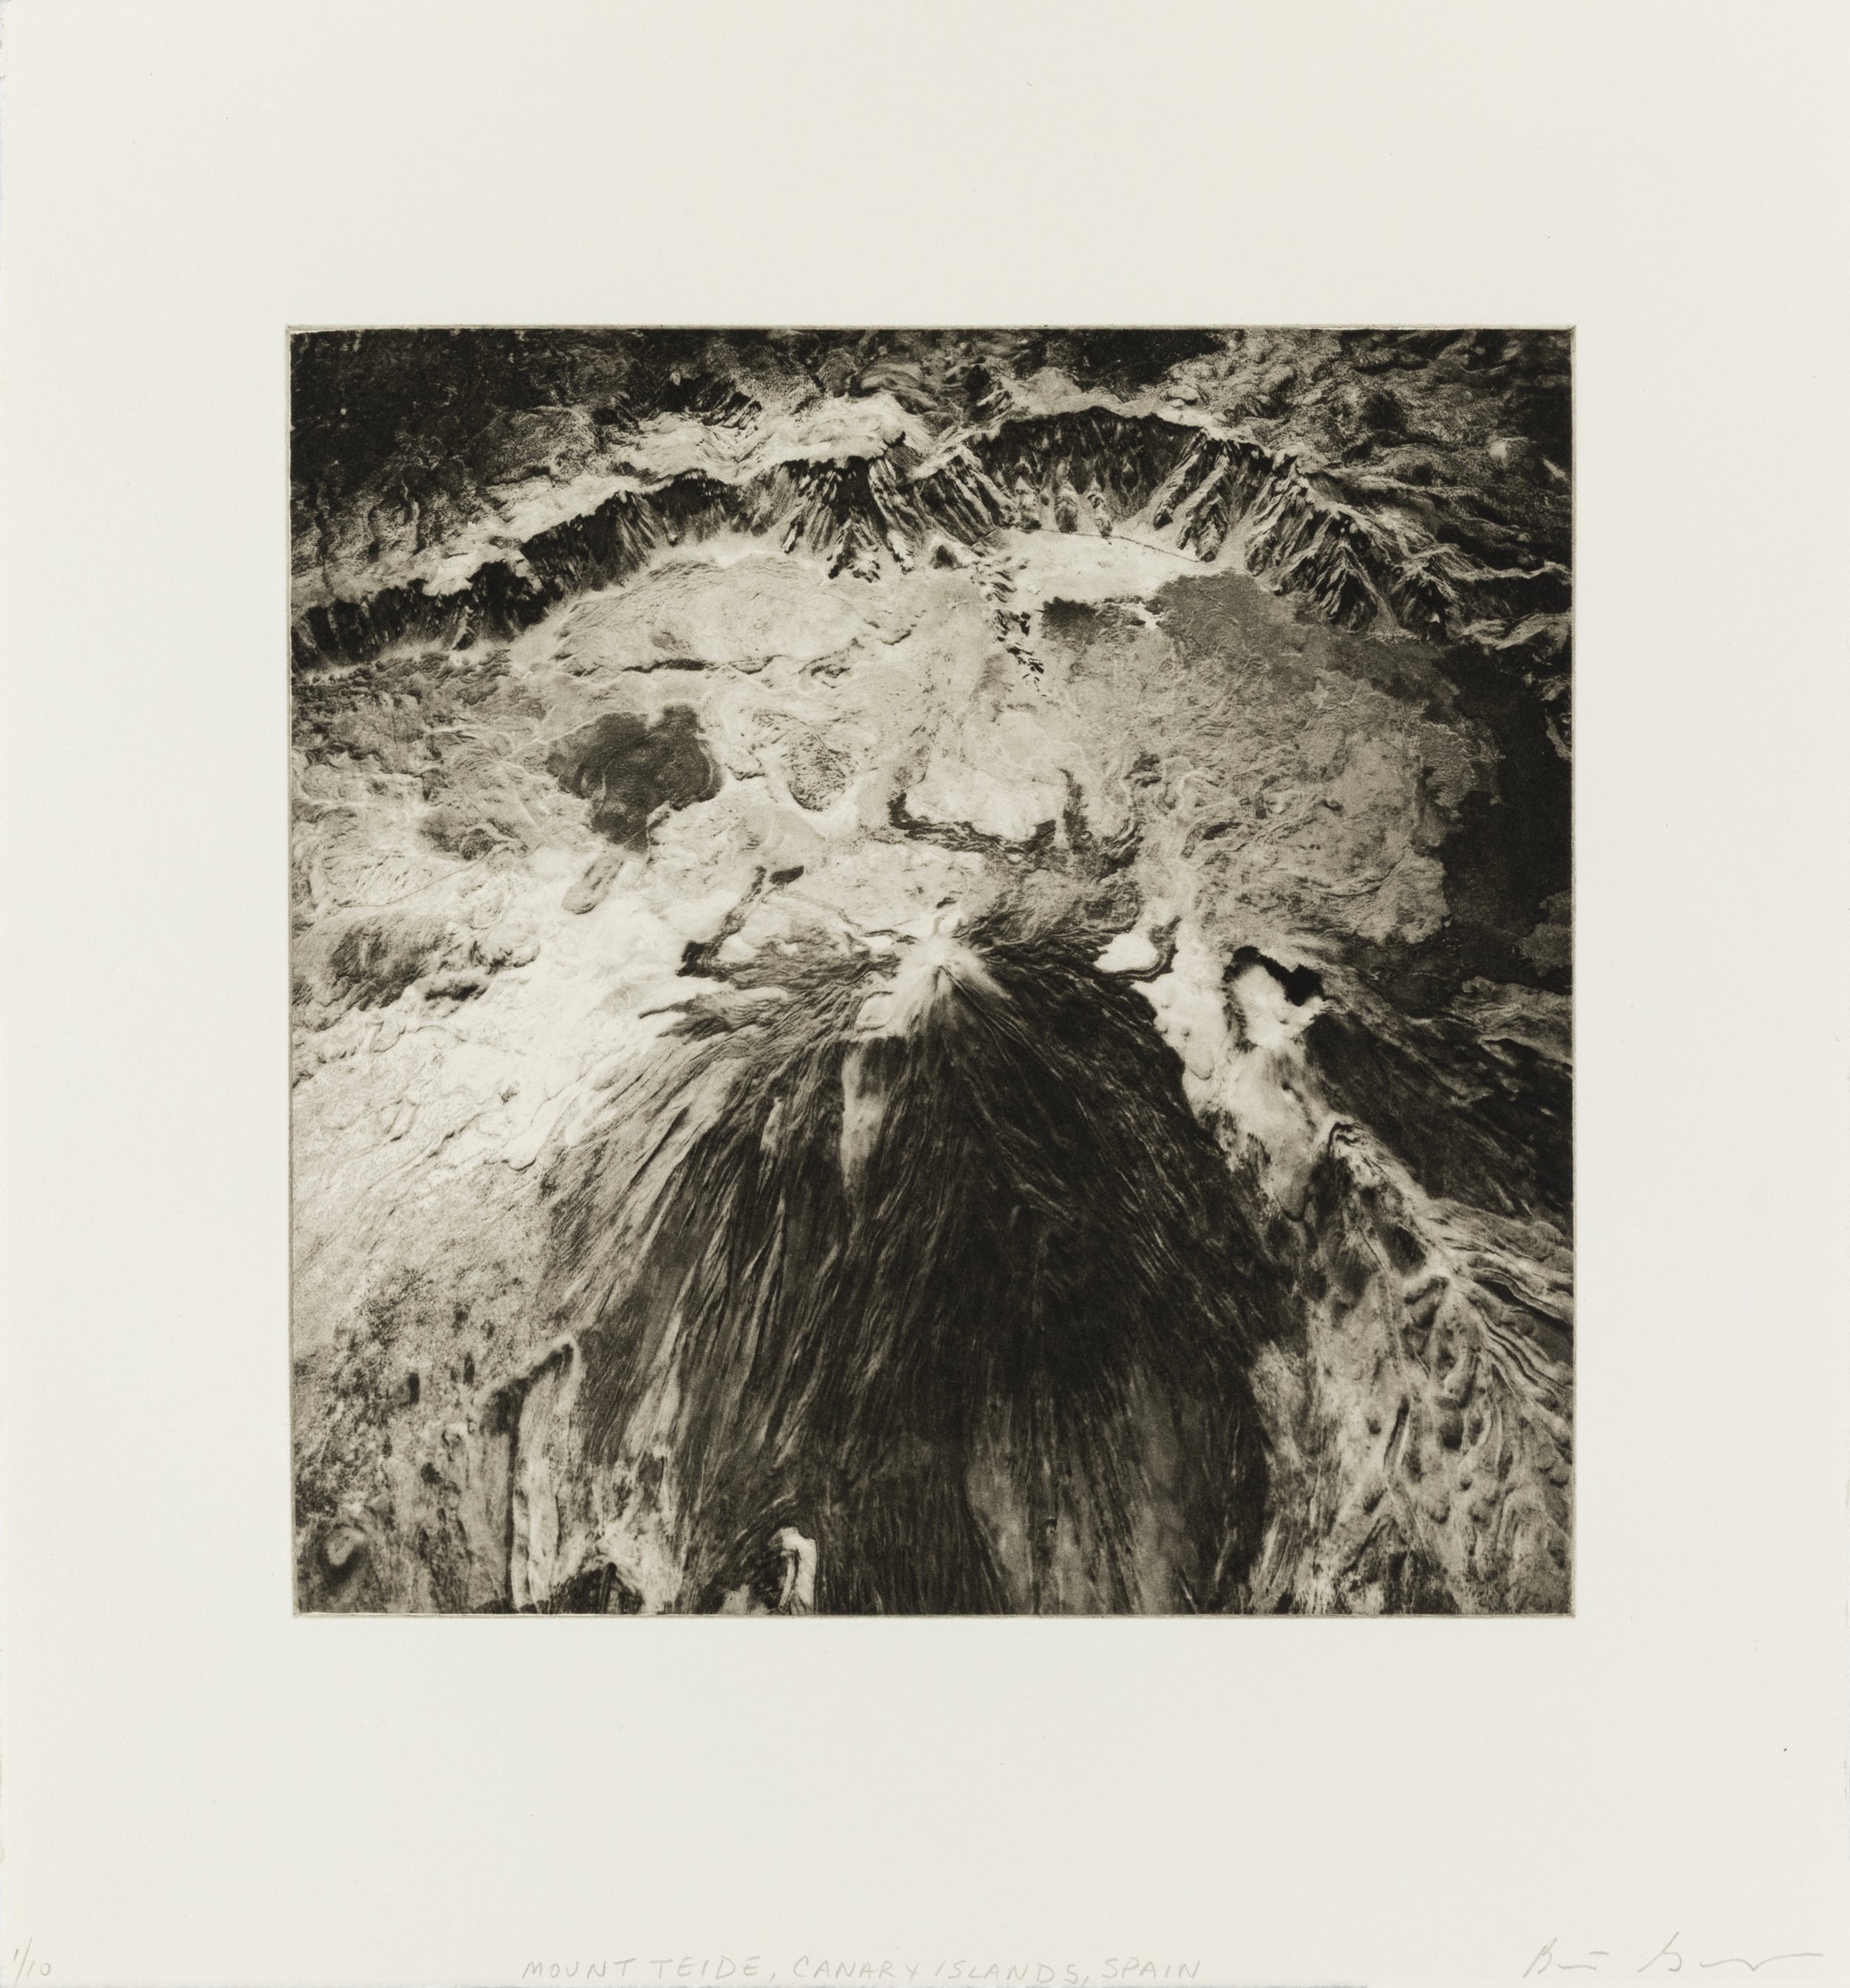    Mount Tiede, Canary Island, Spain, 2021   Copperplate photogravure etching on cotton rag paper, plate size; 10.6 x 10.6, paper size; 16 x 15.5, edition 10        